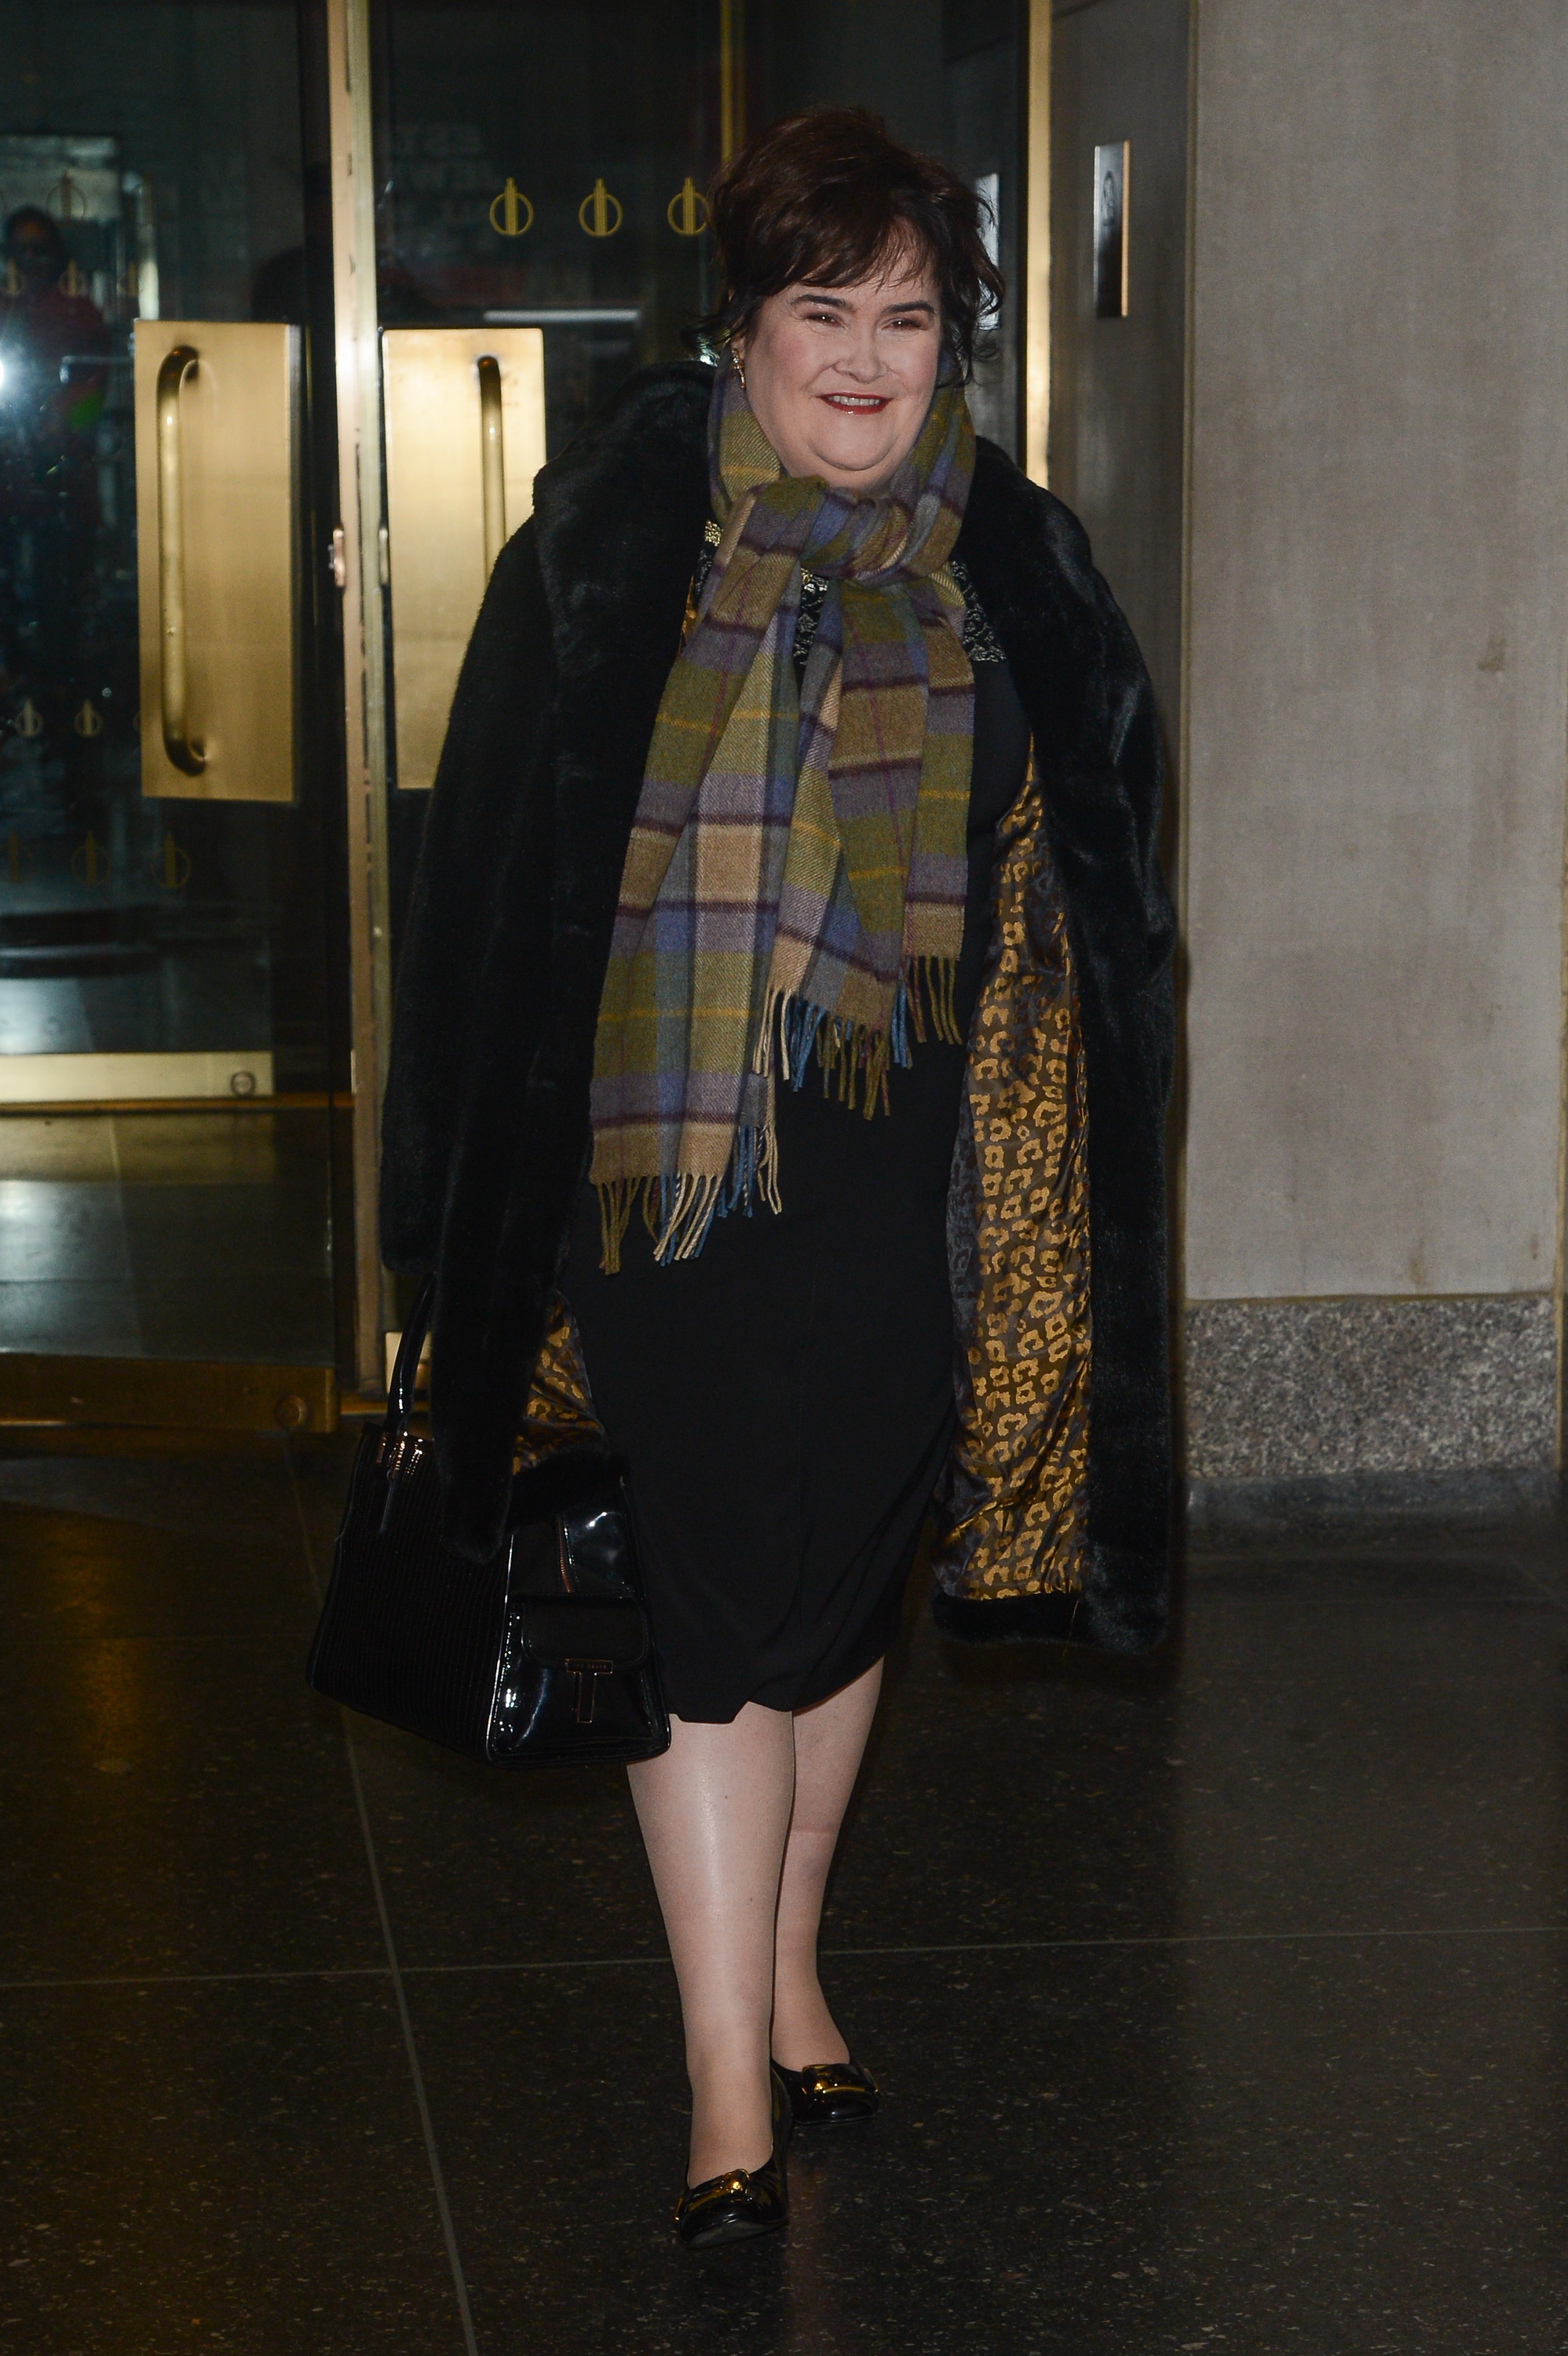 Susan Boyle leaves the "Today Show" taping on December 3, 2013 in New York City | Source: Getty Images